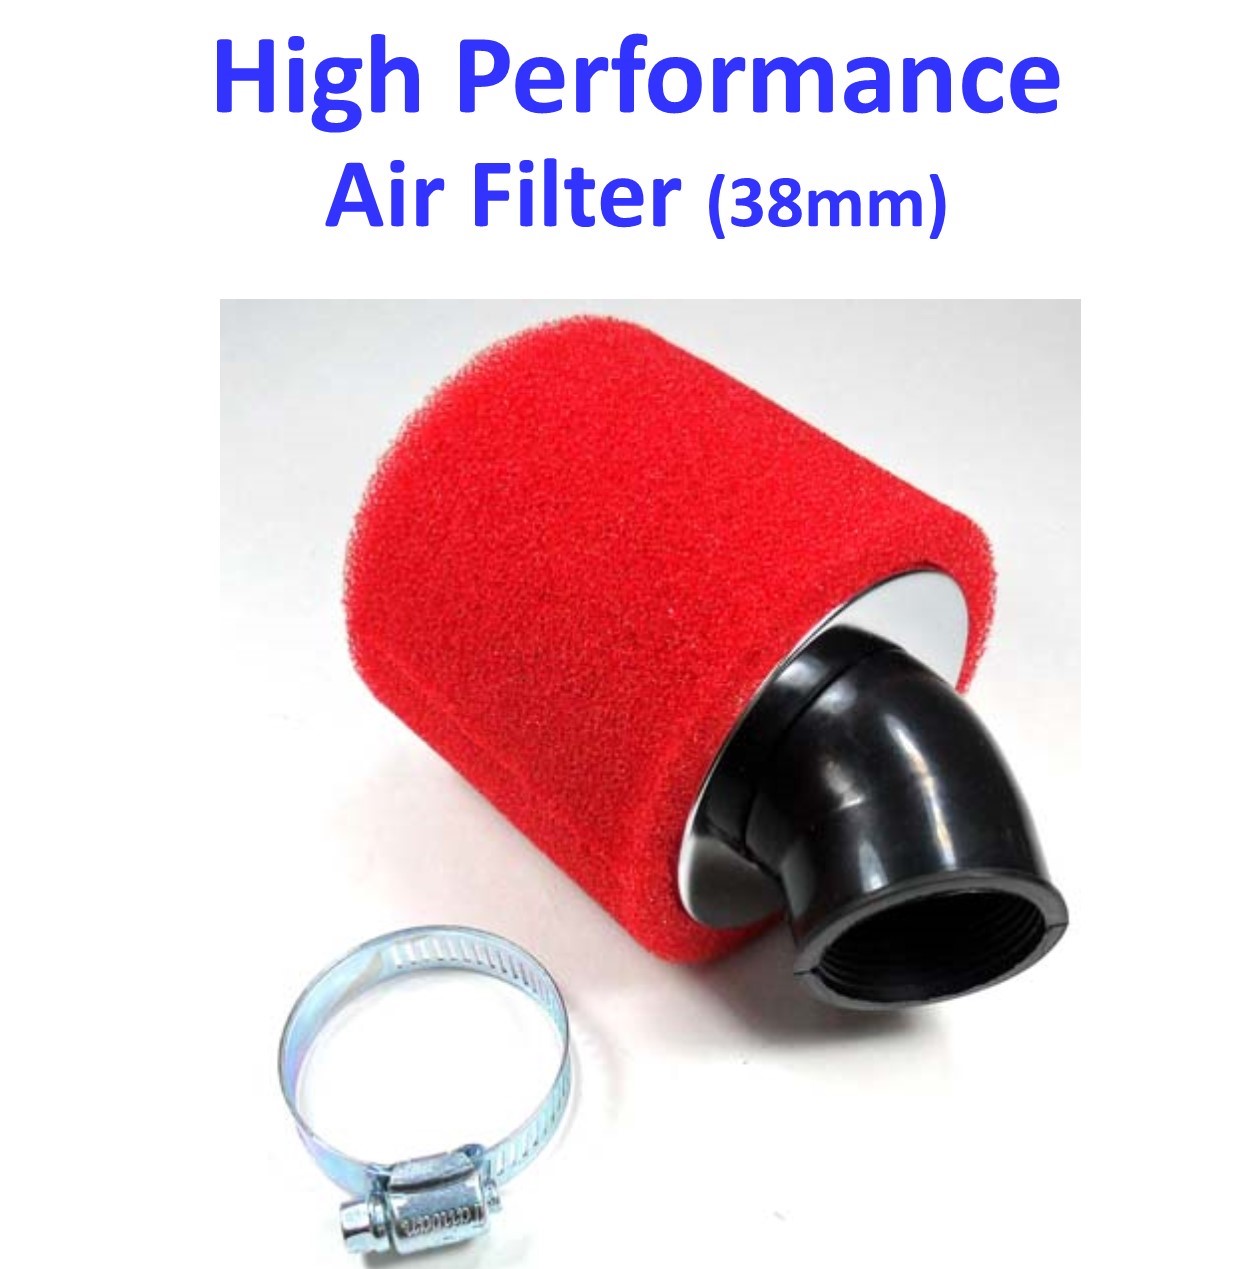 Air Filter 2 Stage ID=38mm OD=92mm, Filter Body Length=75mm 45deg Angle